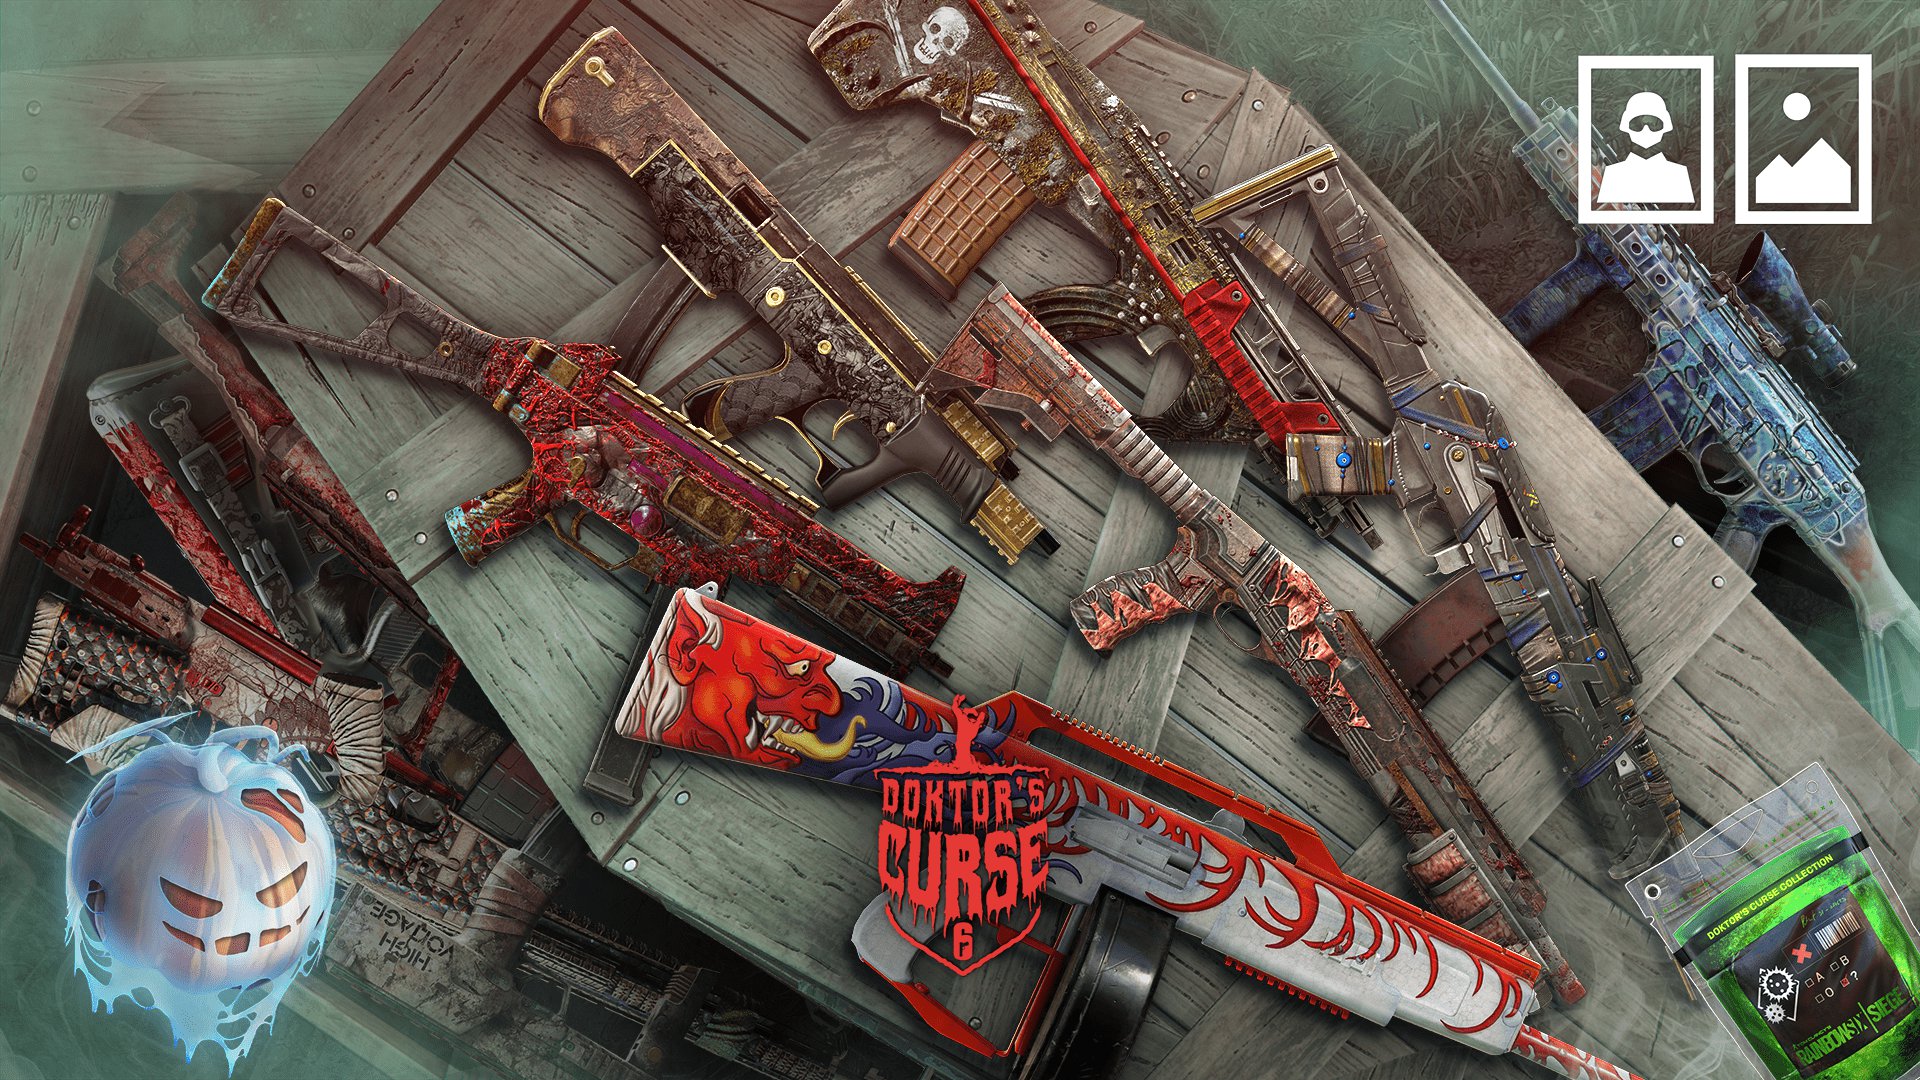 Y7S3_Event_Halloween_Collection_Weapons_1920x1080